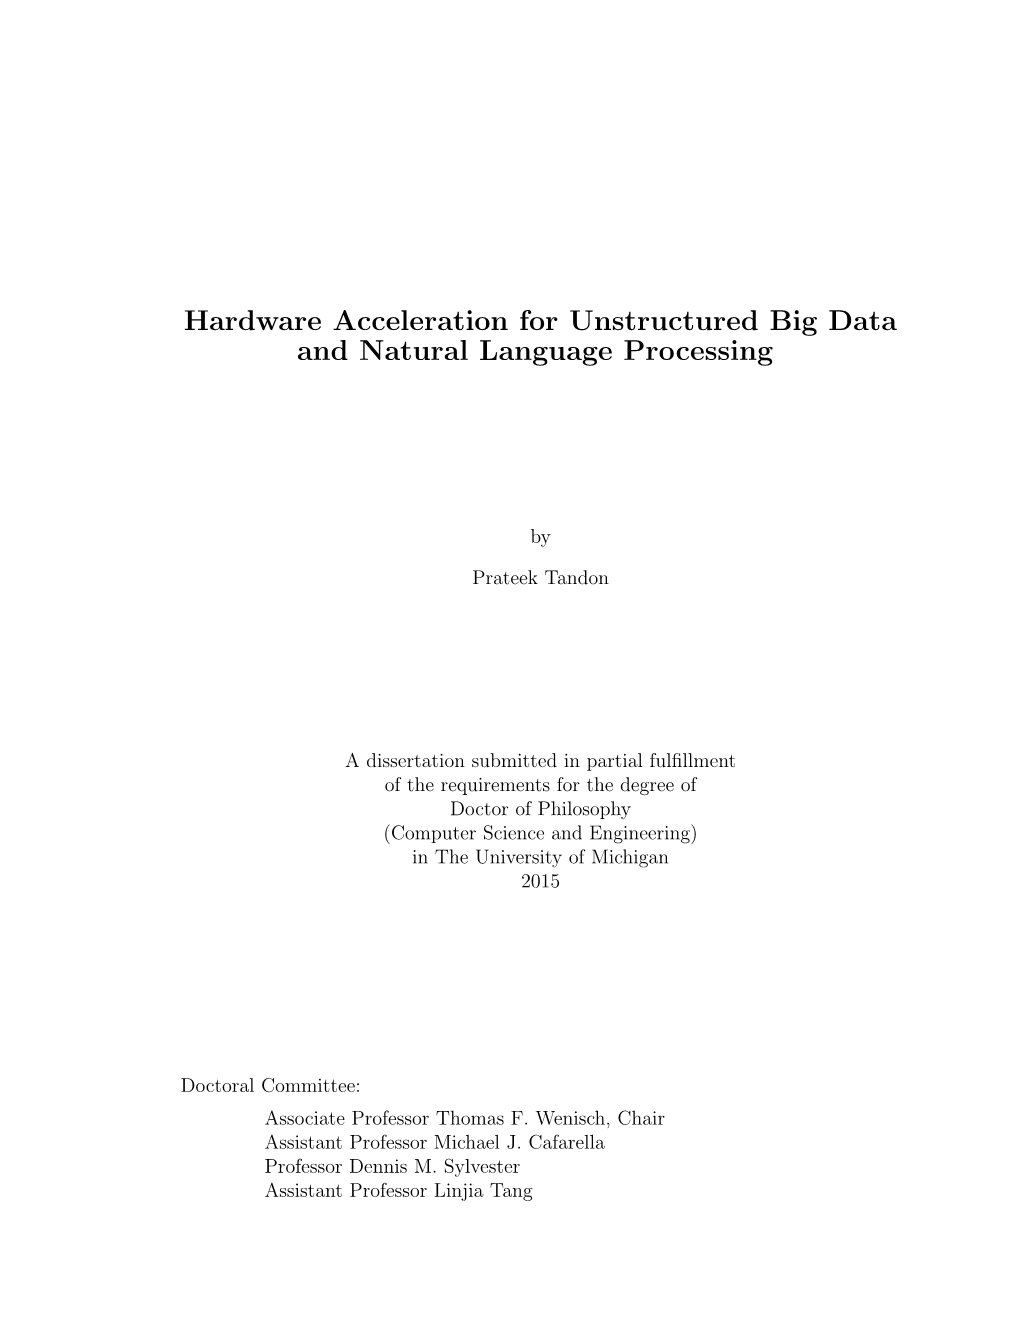 Hardware Acceleration for Unstructured Big Data and Natural Language Processing